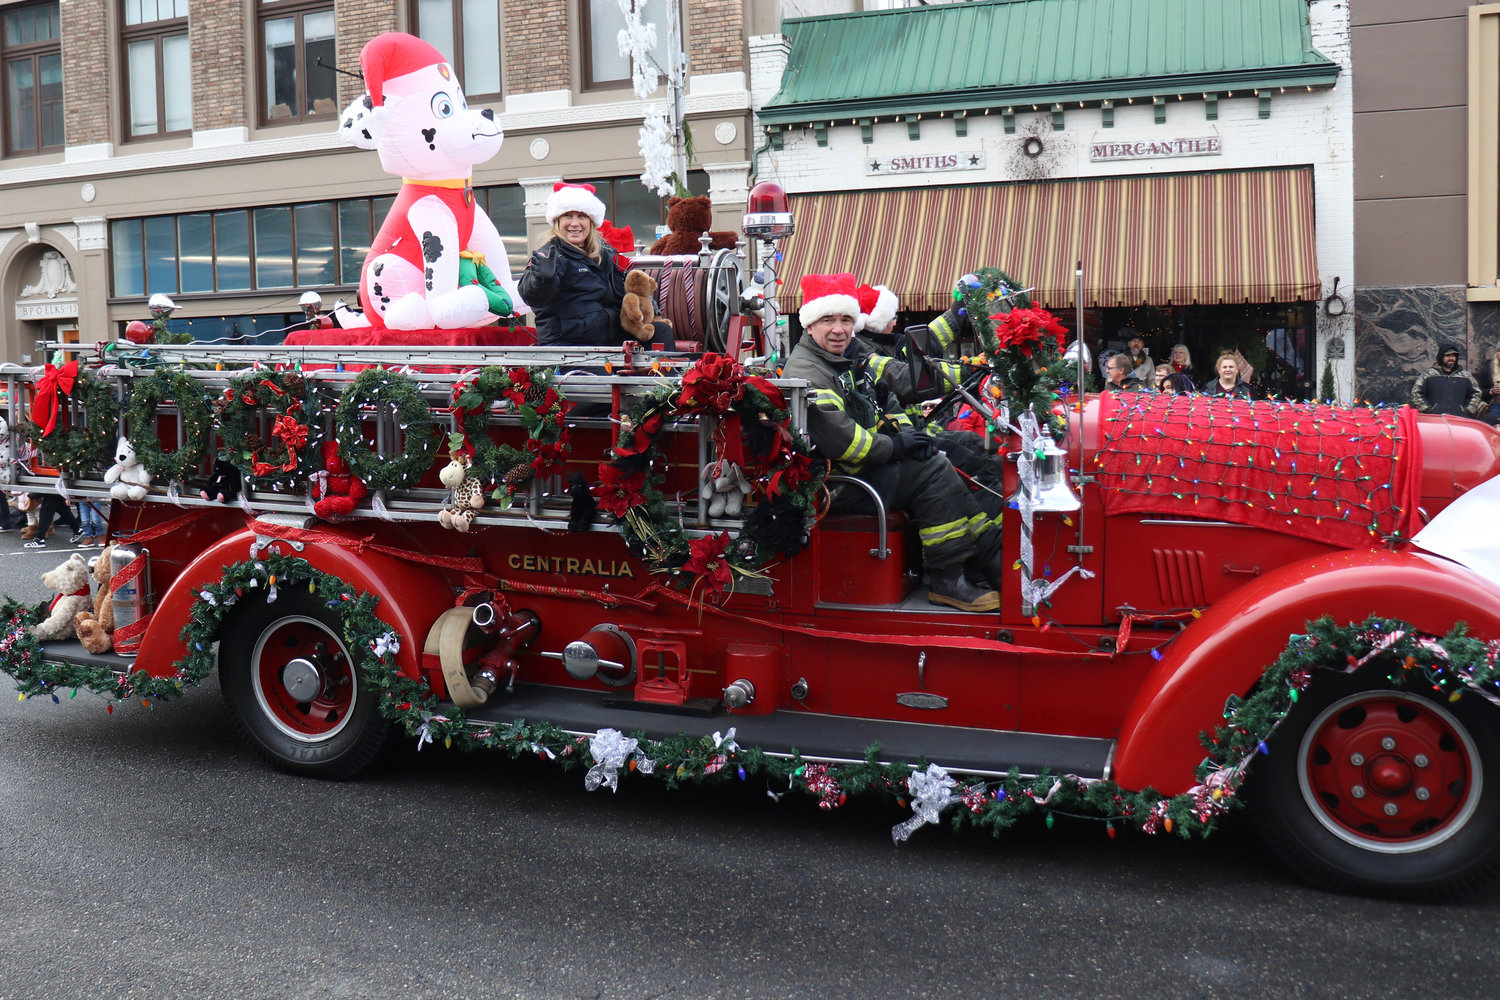 Riverside Fire Authority Chief Michael Kytta serves as the grand marshal of the Santa Parade in downtown Chehalis on Saturday.